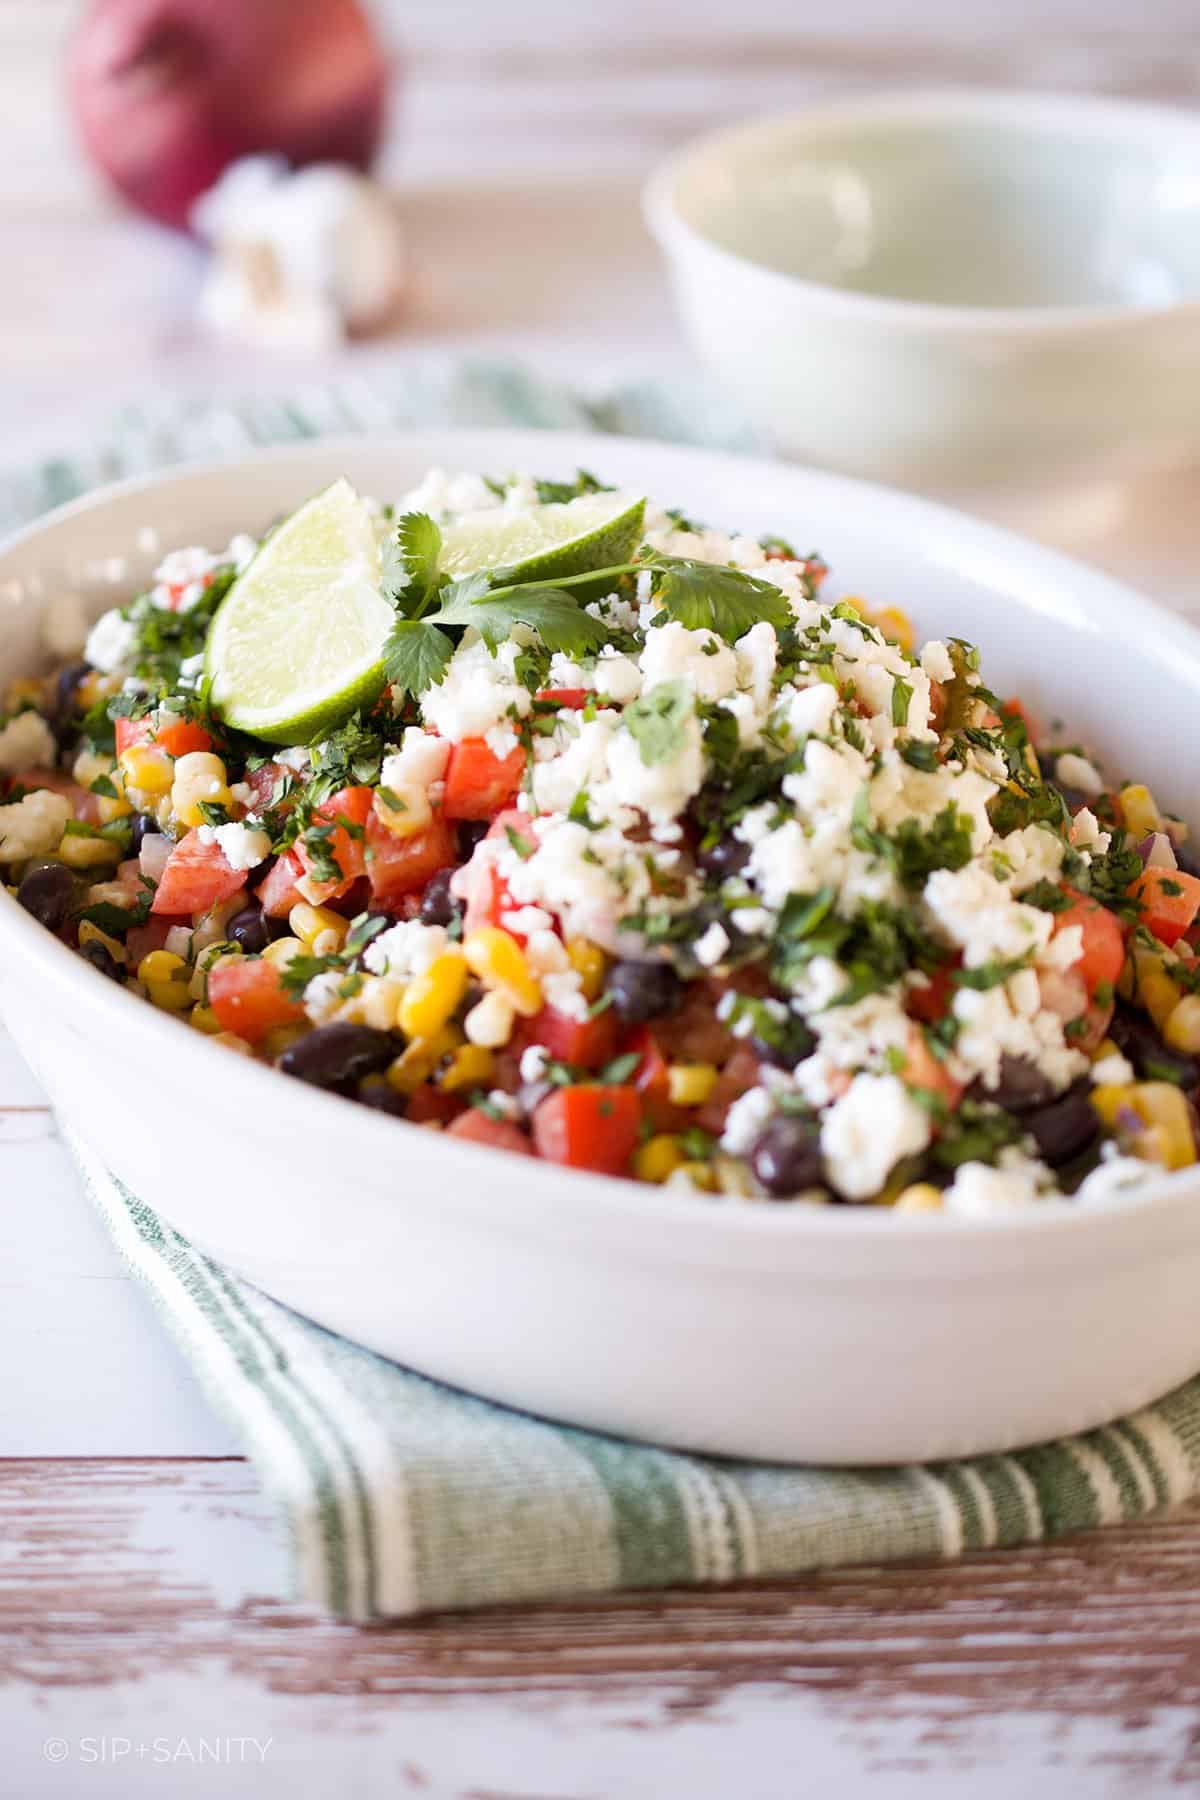 Charred corn salad with black beans in a white dish on a wood table.